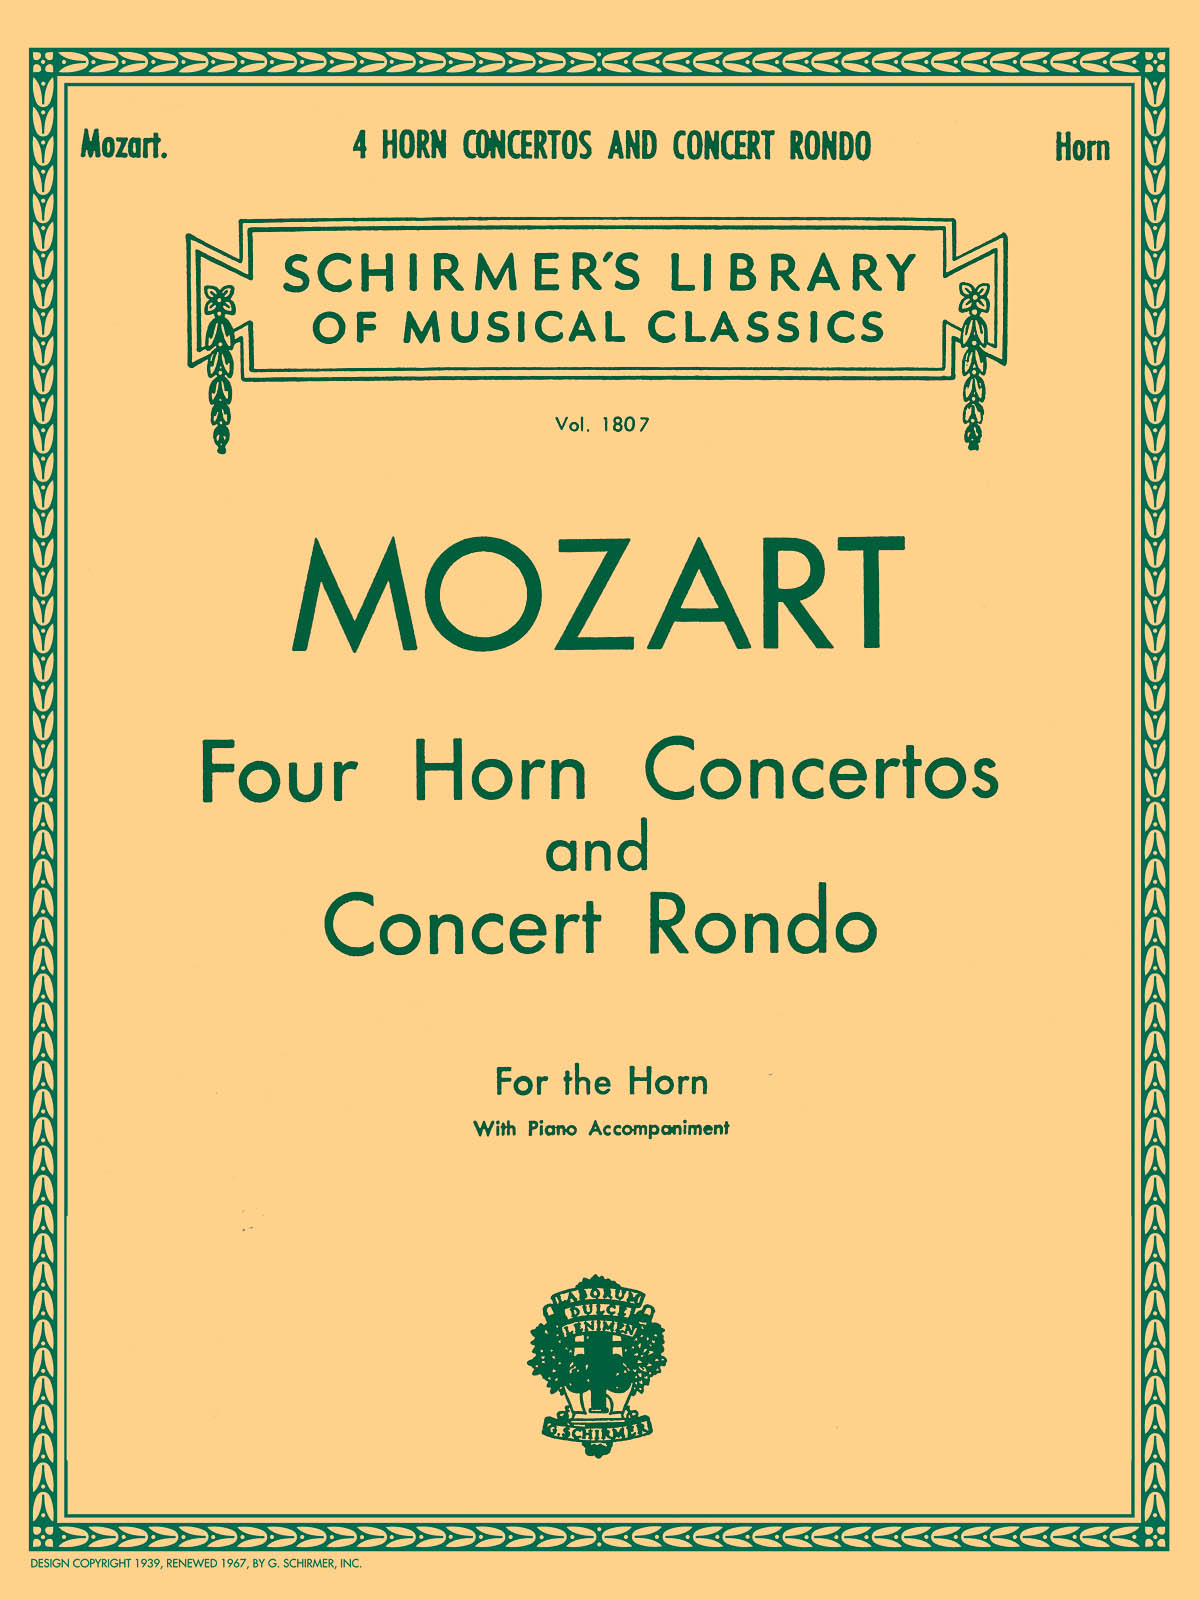 Wolfgang Amadeus Mozart: 4 Horn Concertos and Concert Rondo: French Horn: